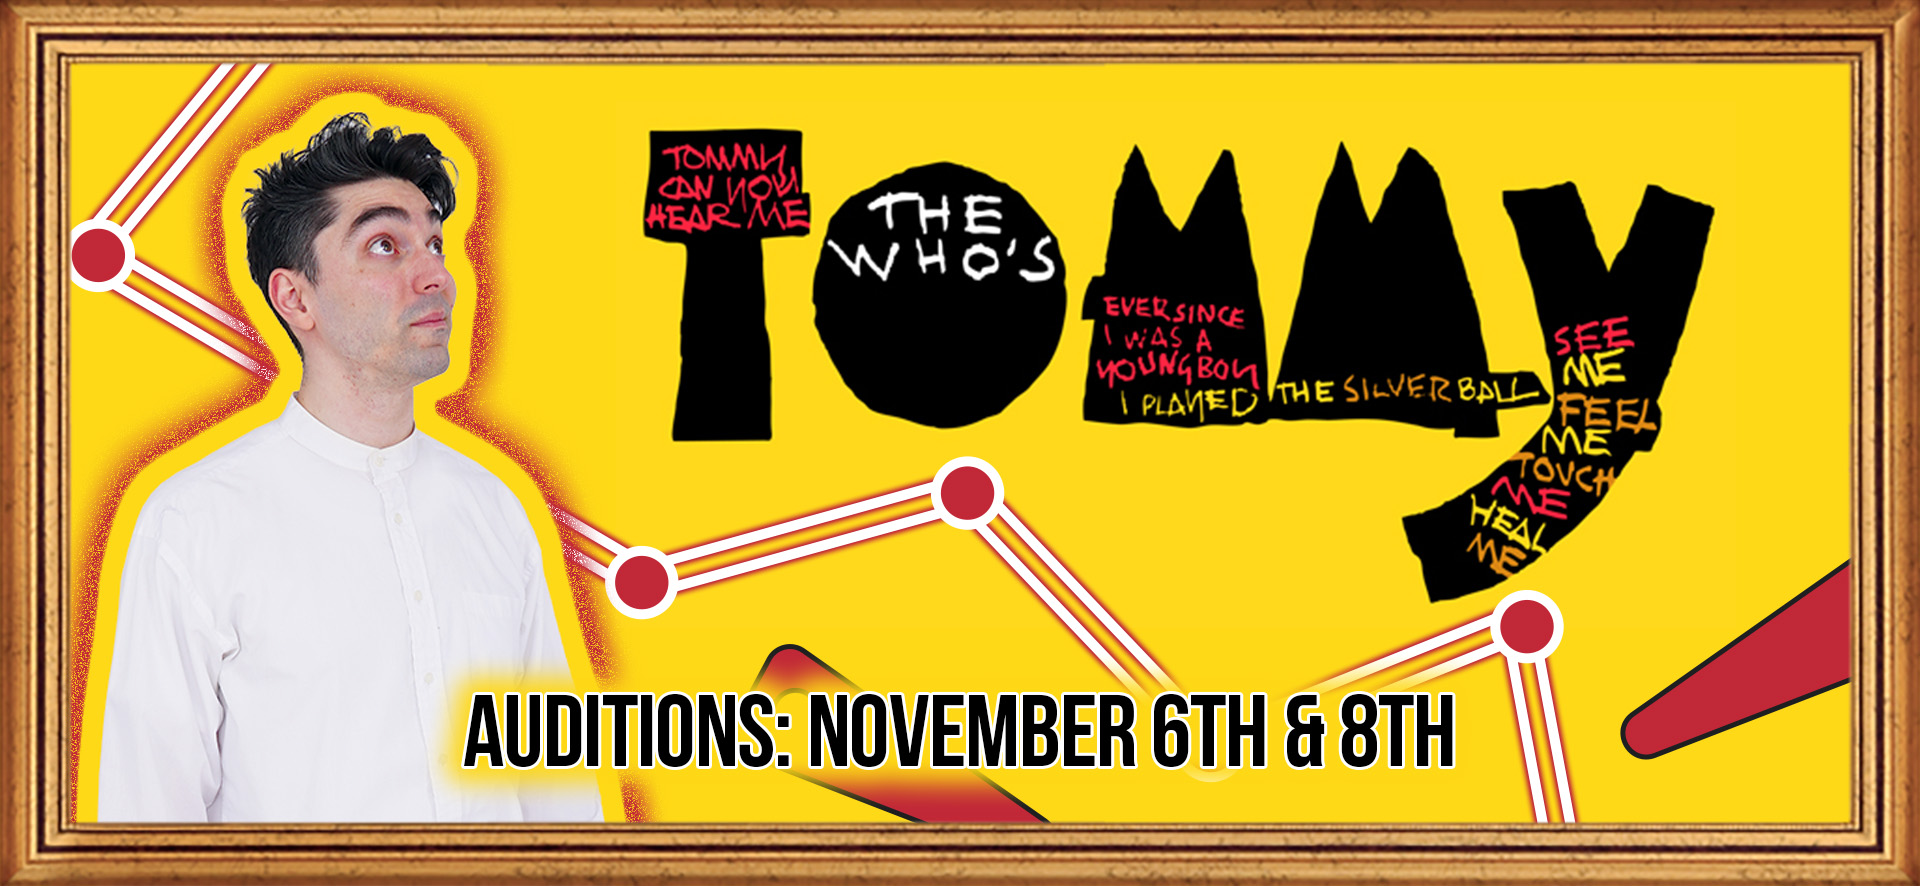 The Who's Tommy Auditions